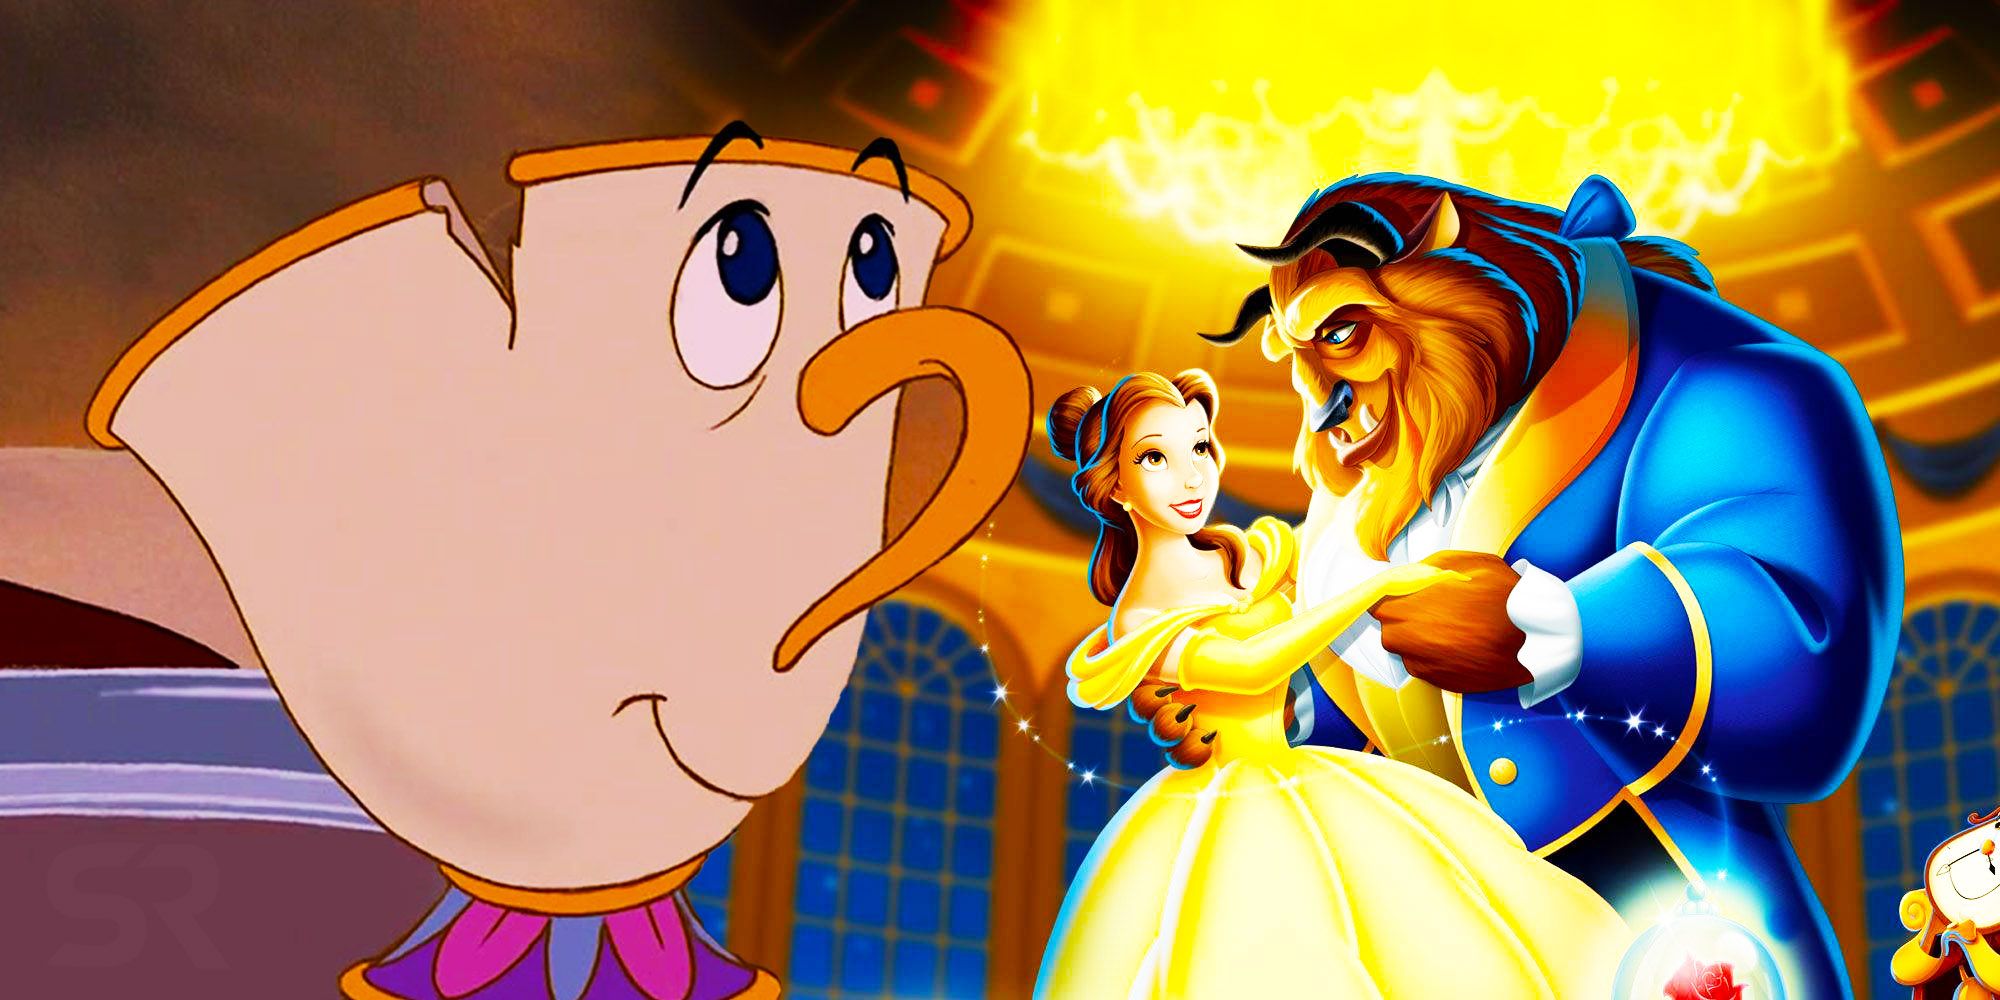 What Time Period Beauty And The Beast Is Set In (It's Later Than You Think)